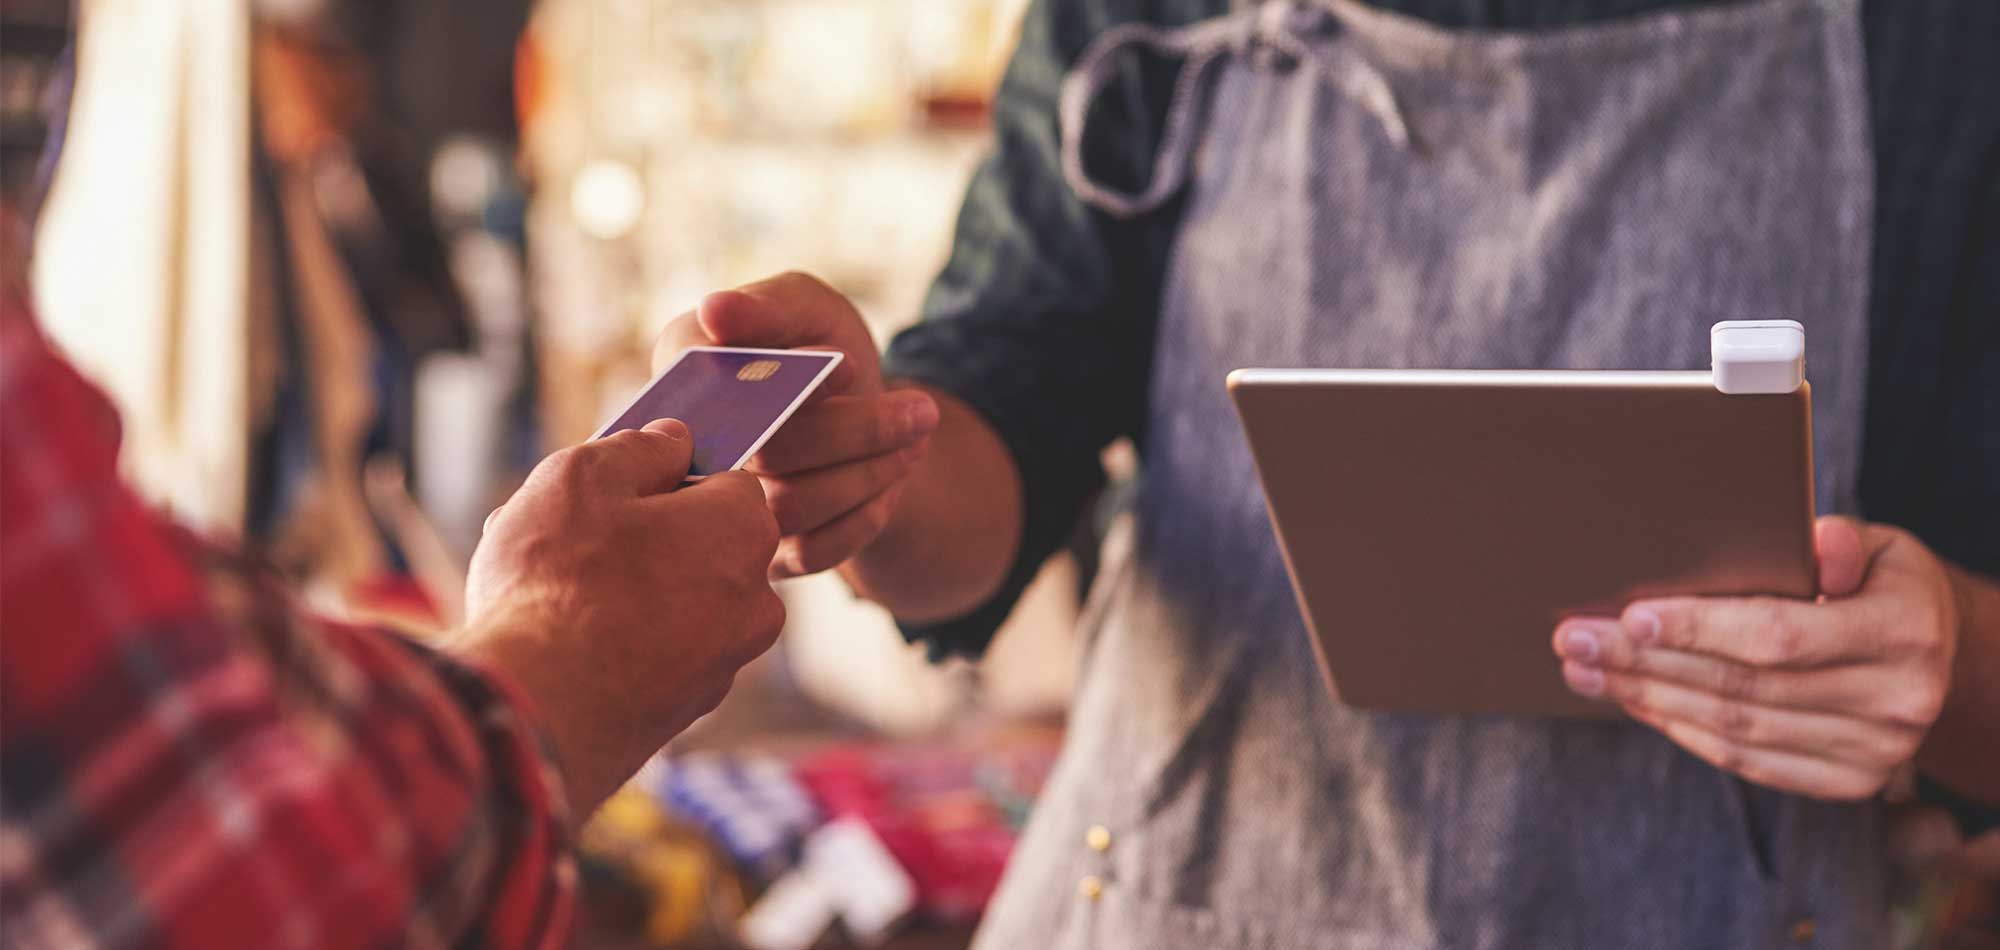 3 Common Problems Retailers Have with BYOD and How to Avoid Them